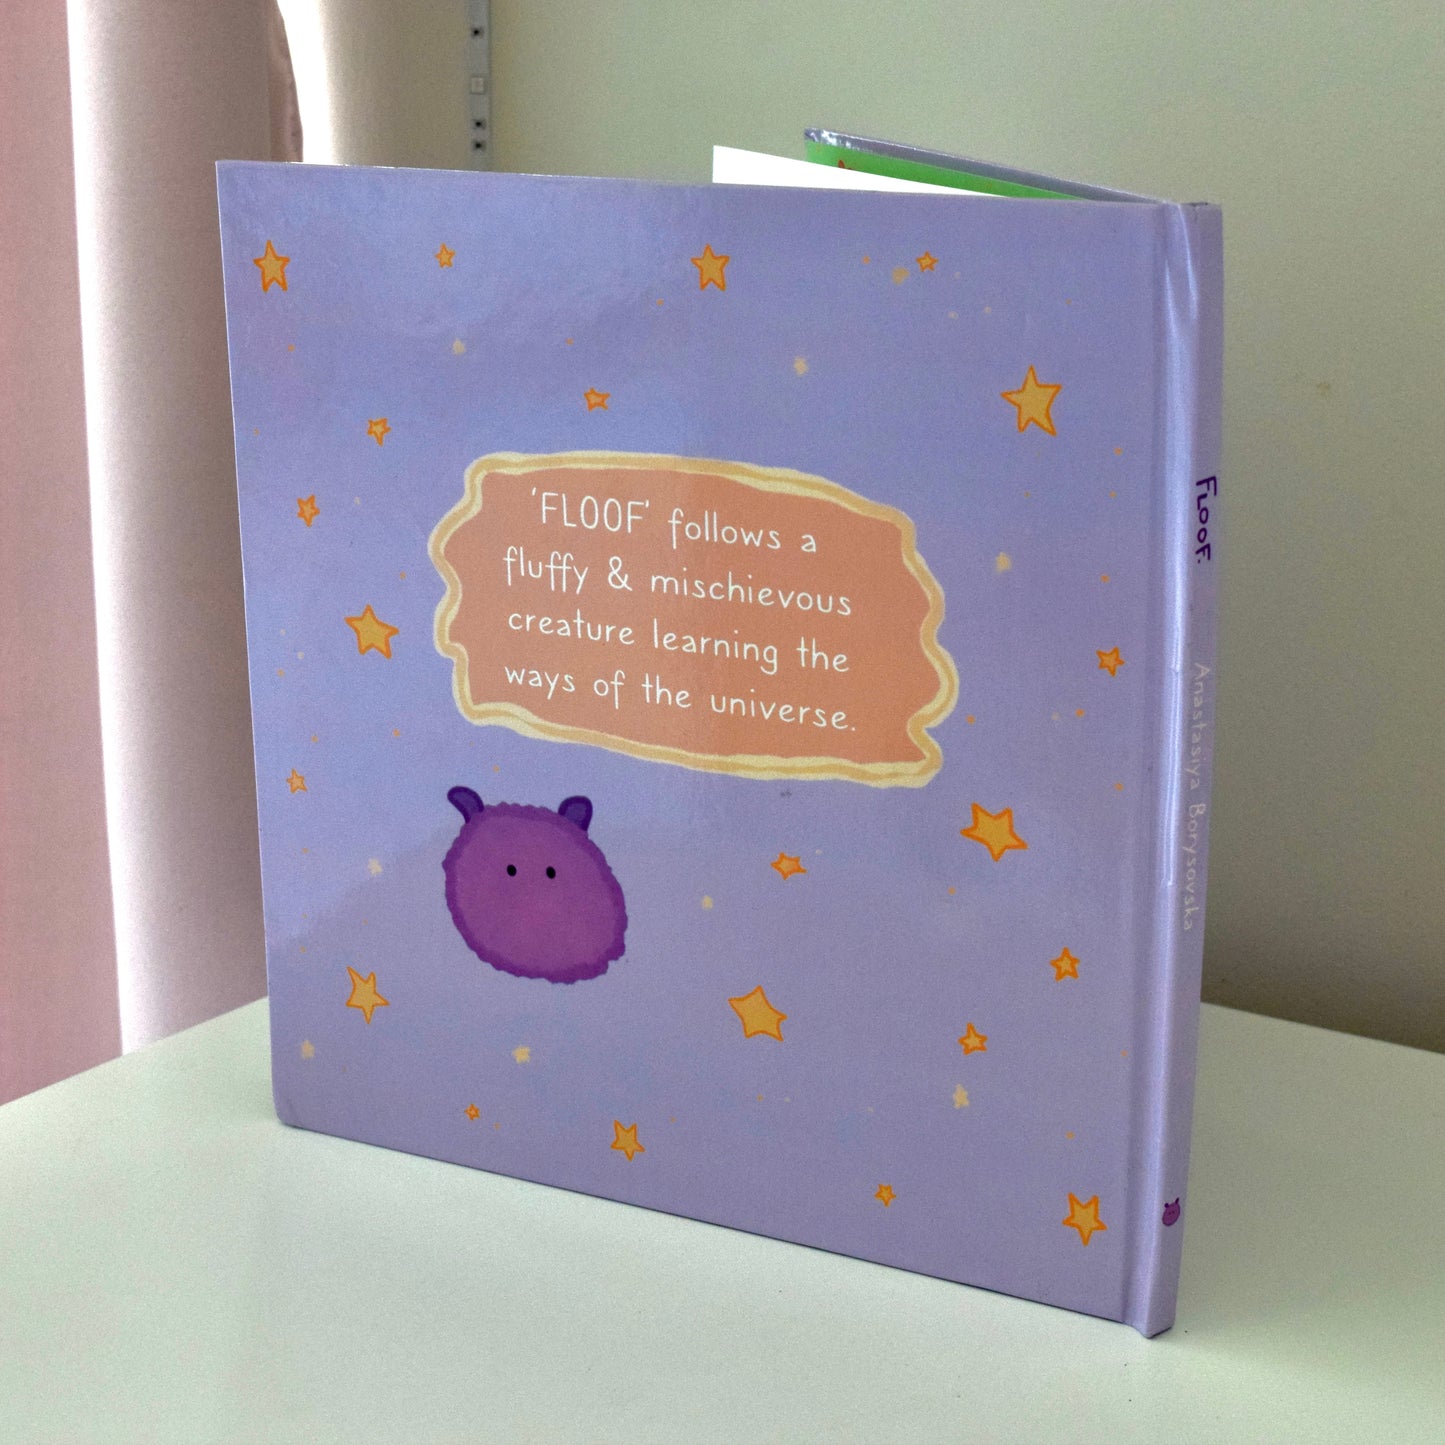 Back cover of 'Floof' storybook. Tiny purple fluffy alien pictured. 